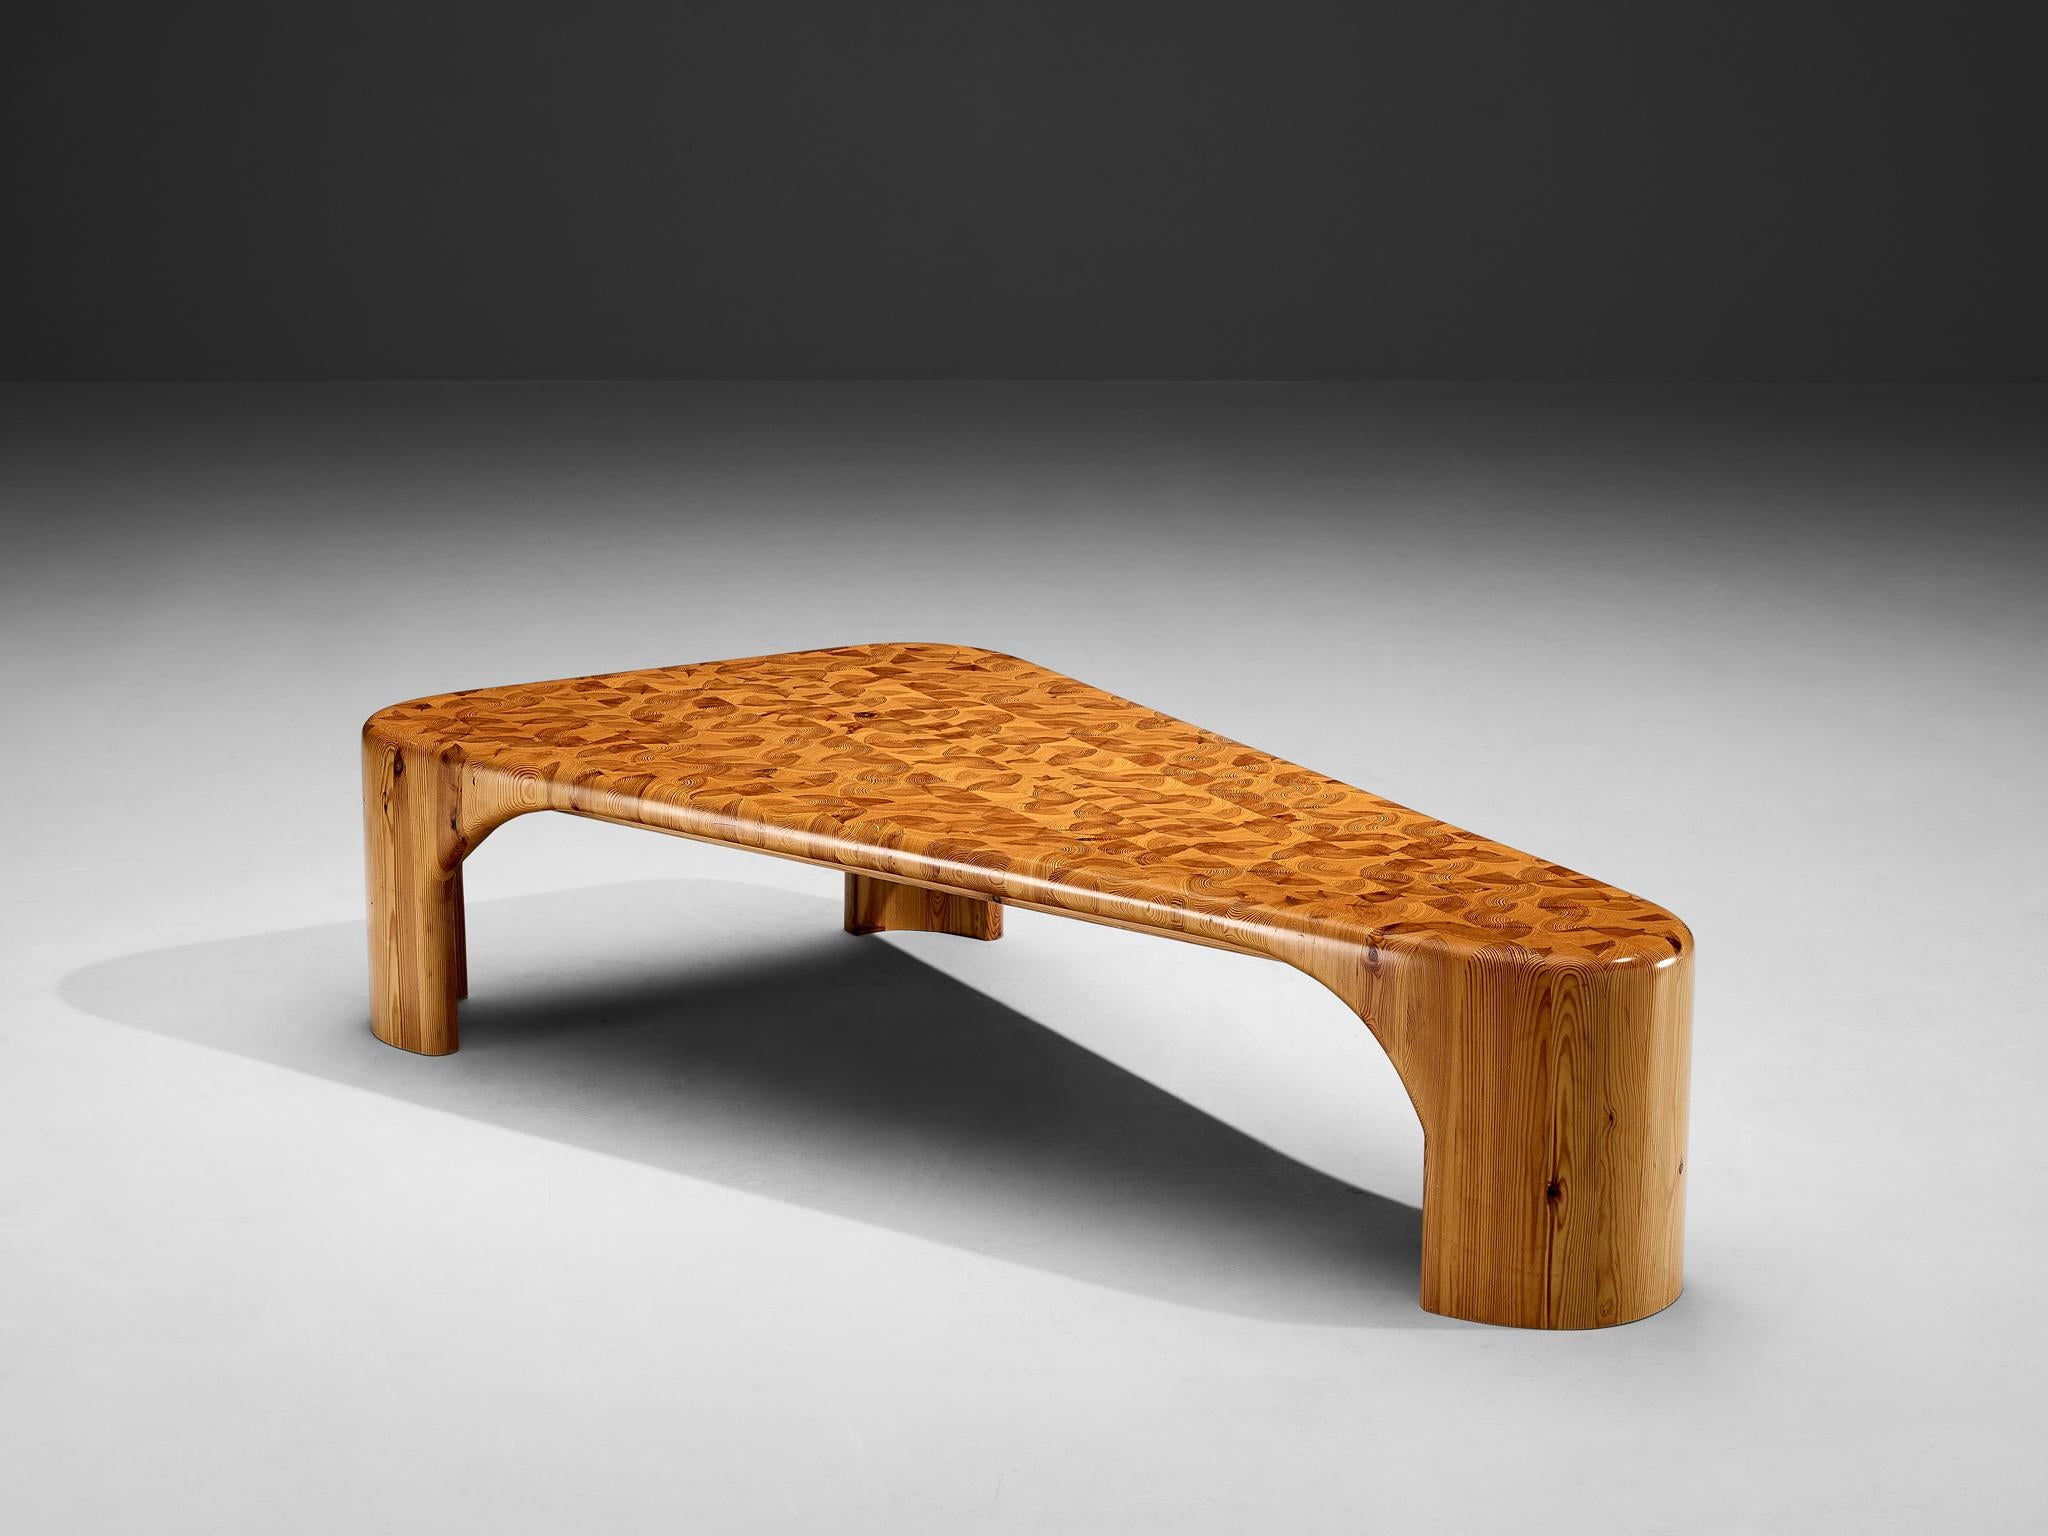 Coffee table, pine, Sweden, 1960s/1970s

This asymmetrical coffee table stands as a striking testament to Scandinavian craftsmanship and design ingenuity. The table's asymmetrical design adds a dynamic flair to any living space, offering a contrast